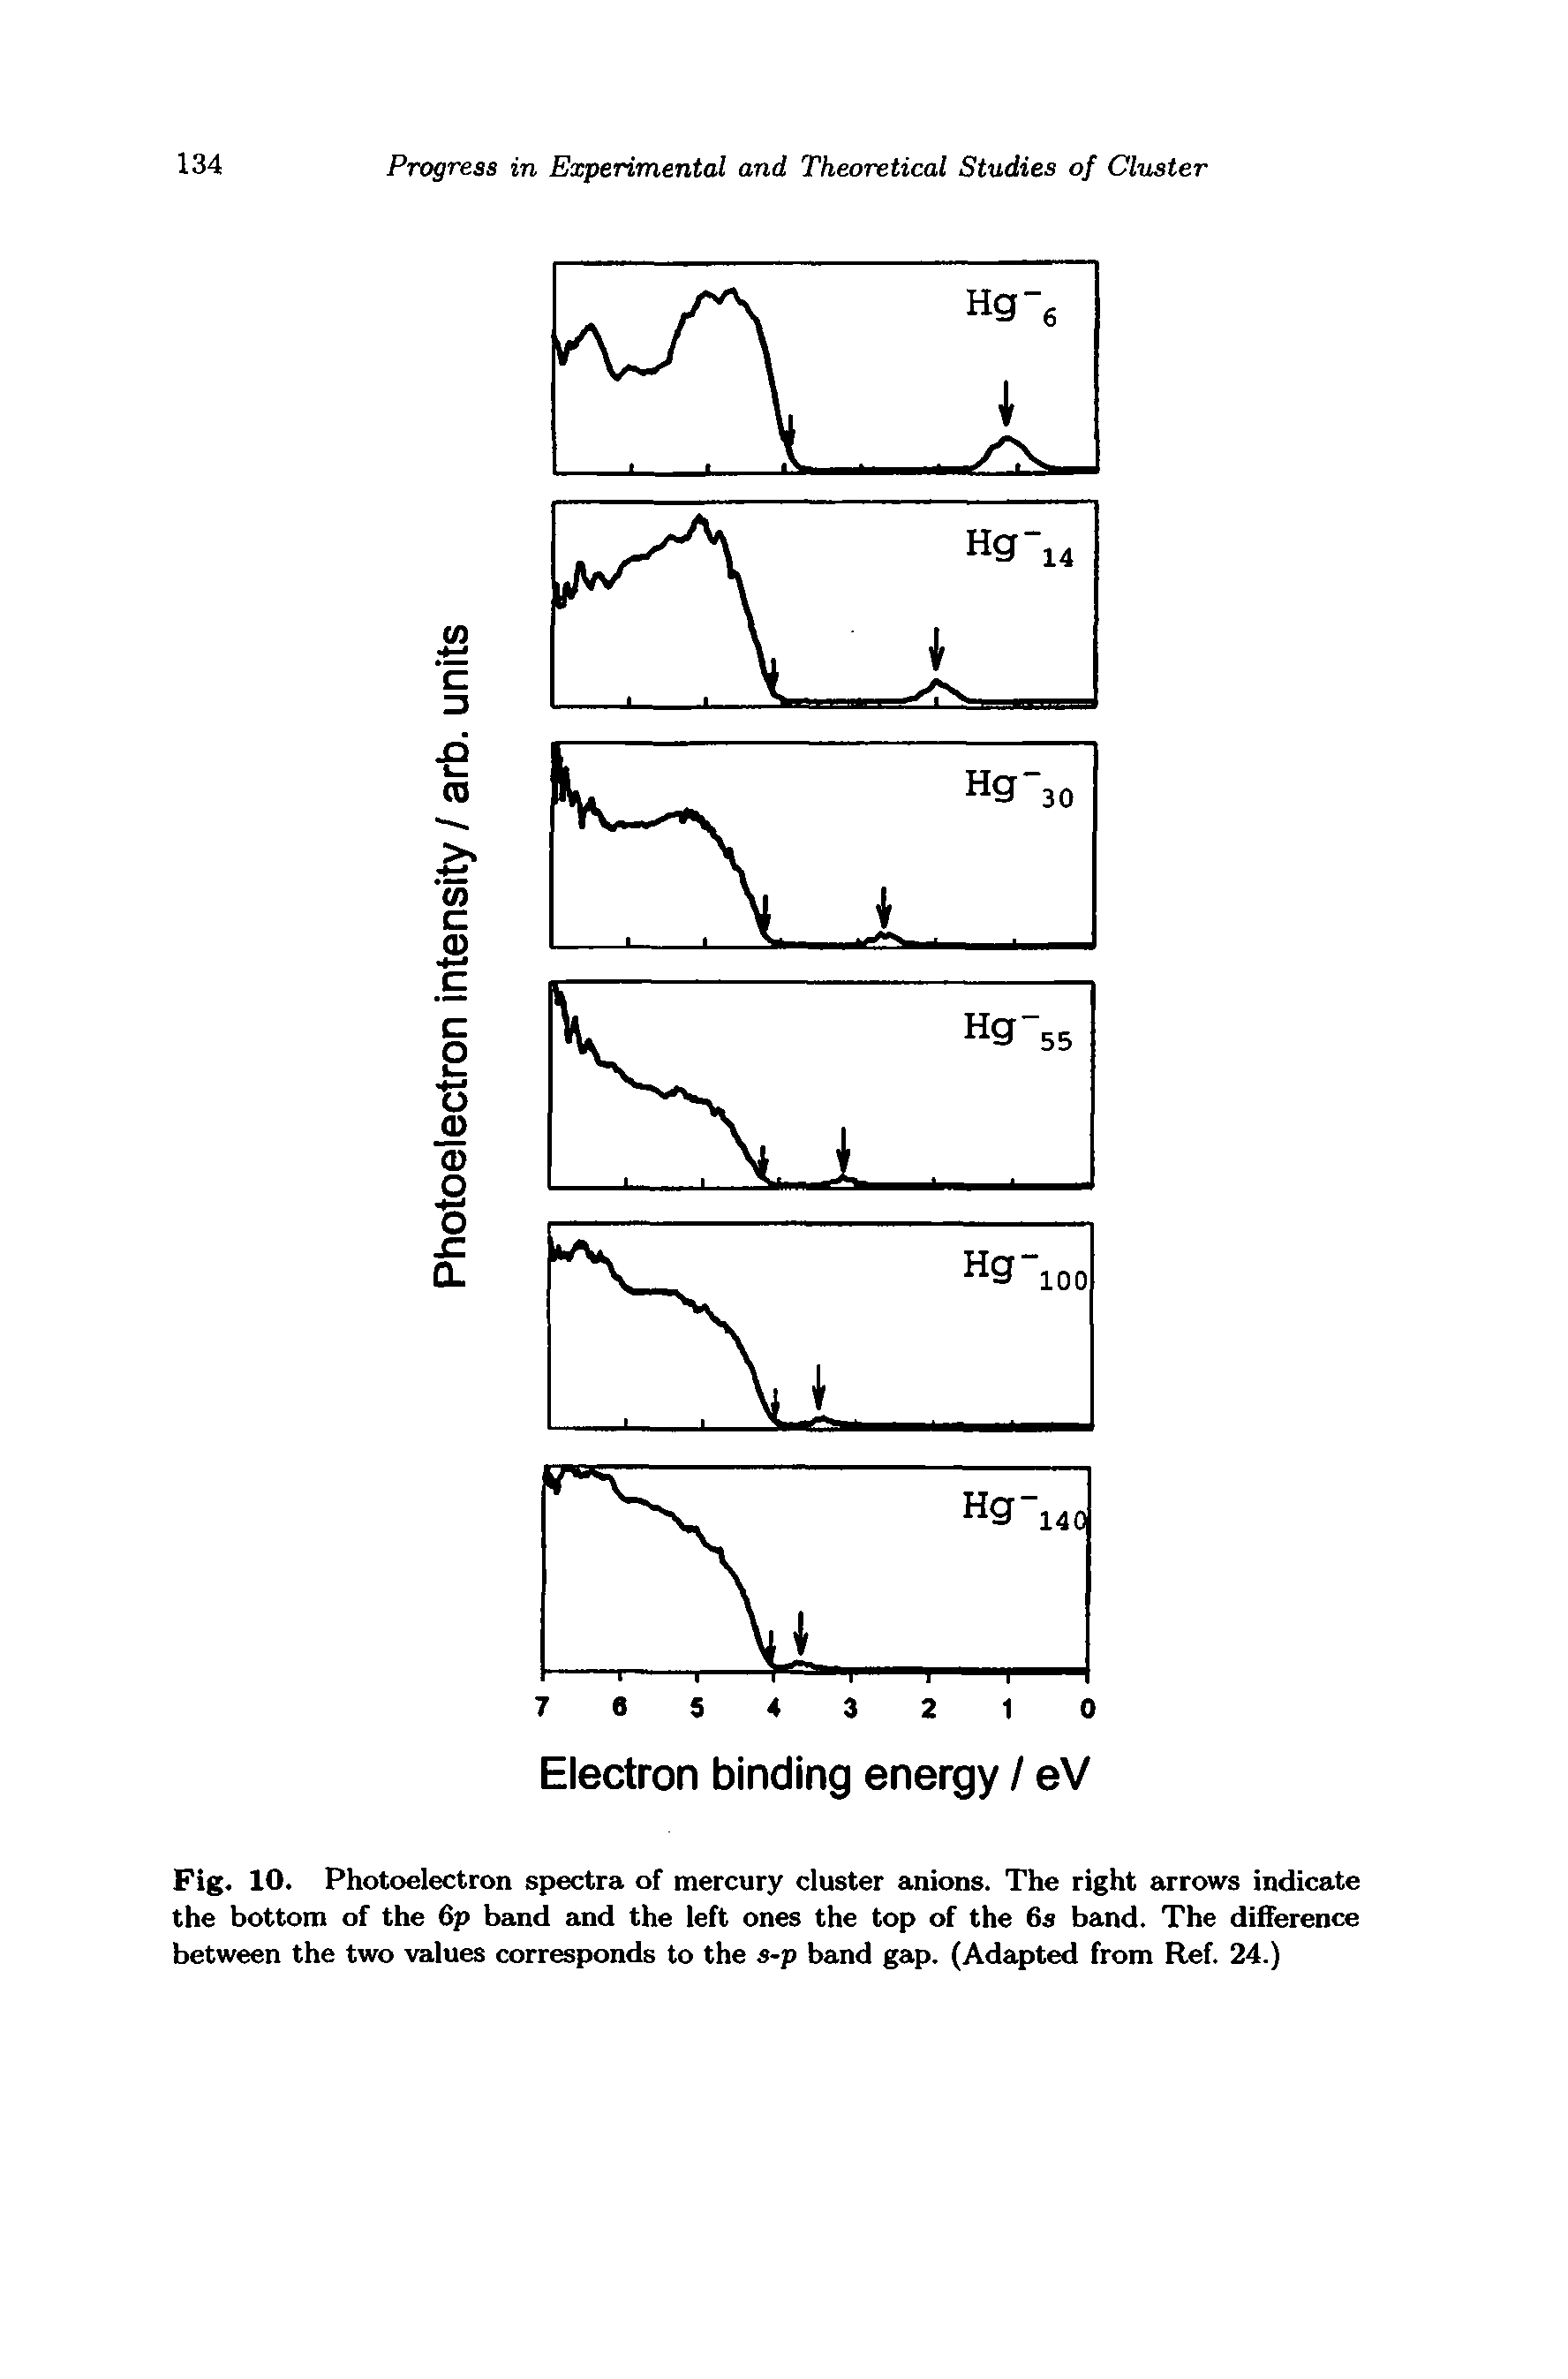 Fig. 10. Photoelectron spectra of mercury cluster anions. The right arrows indicate the bottom of the 6p band and the left ones the top of the 6s band. The difference between the two values corresponds to the s-p band gap. (Adapted from Ref. 24.)...